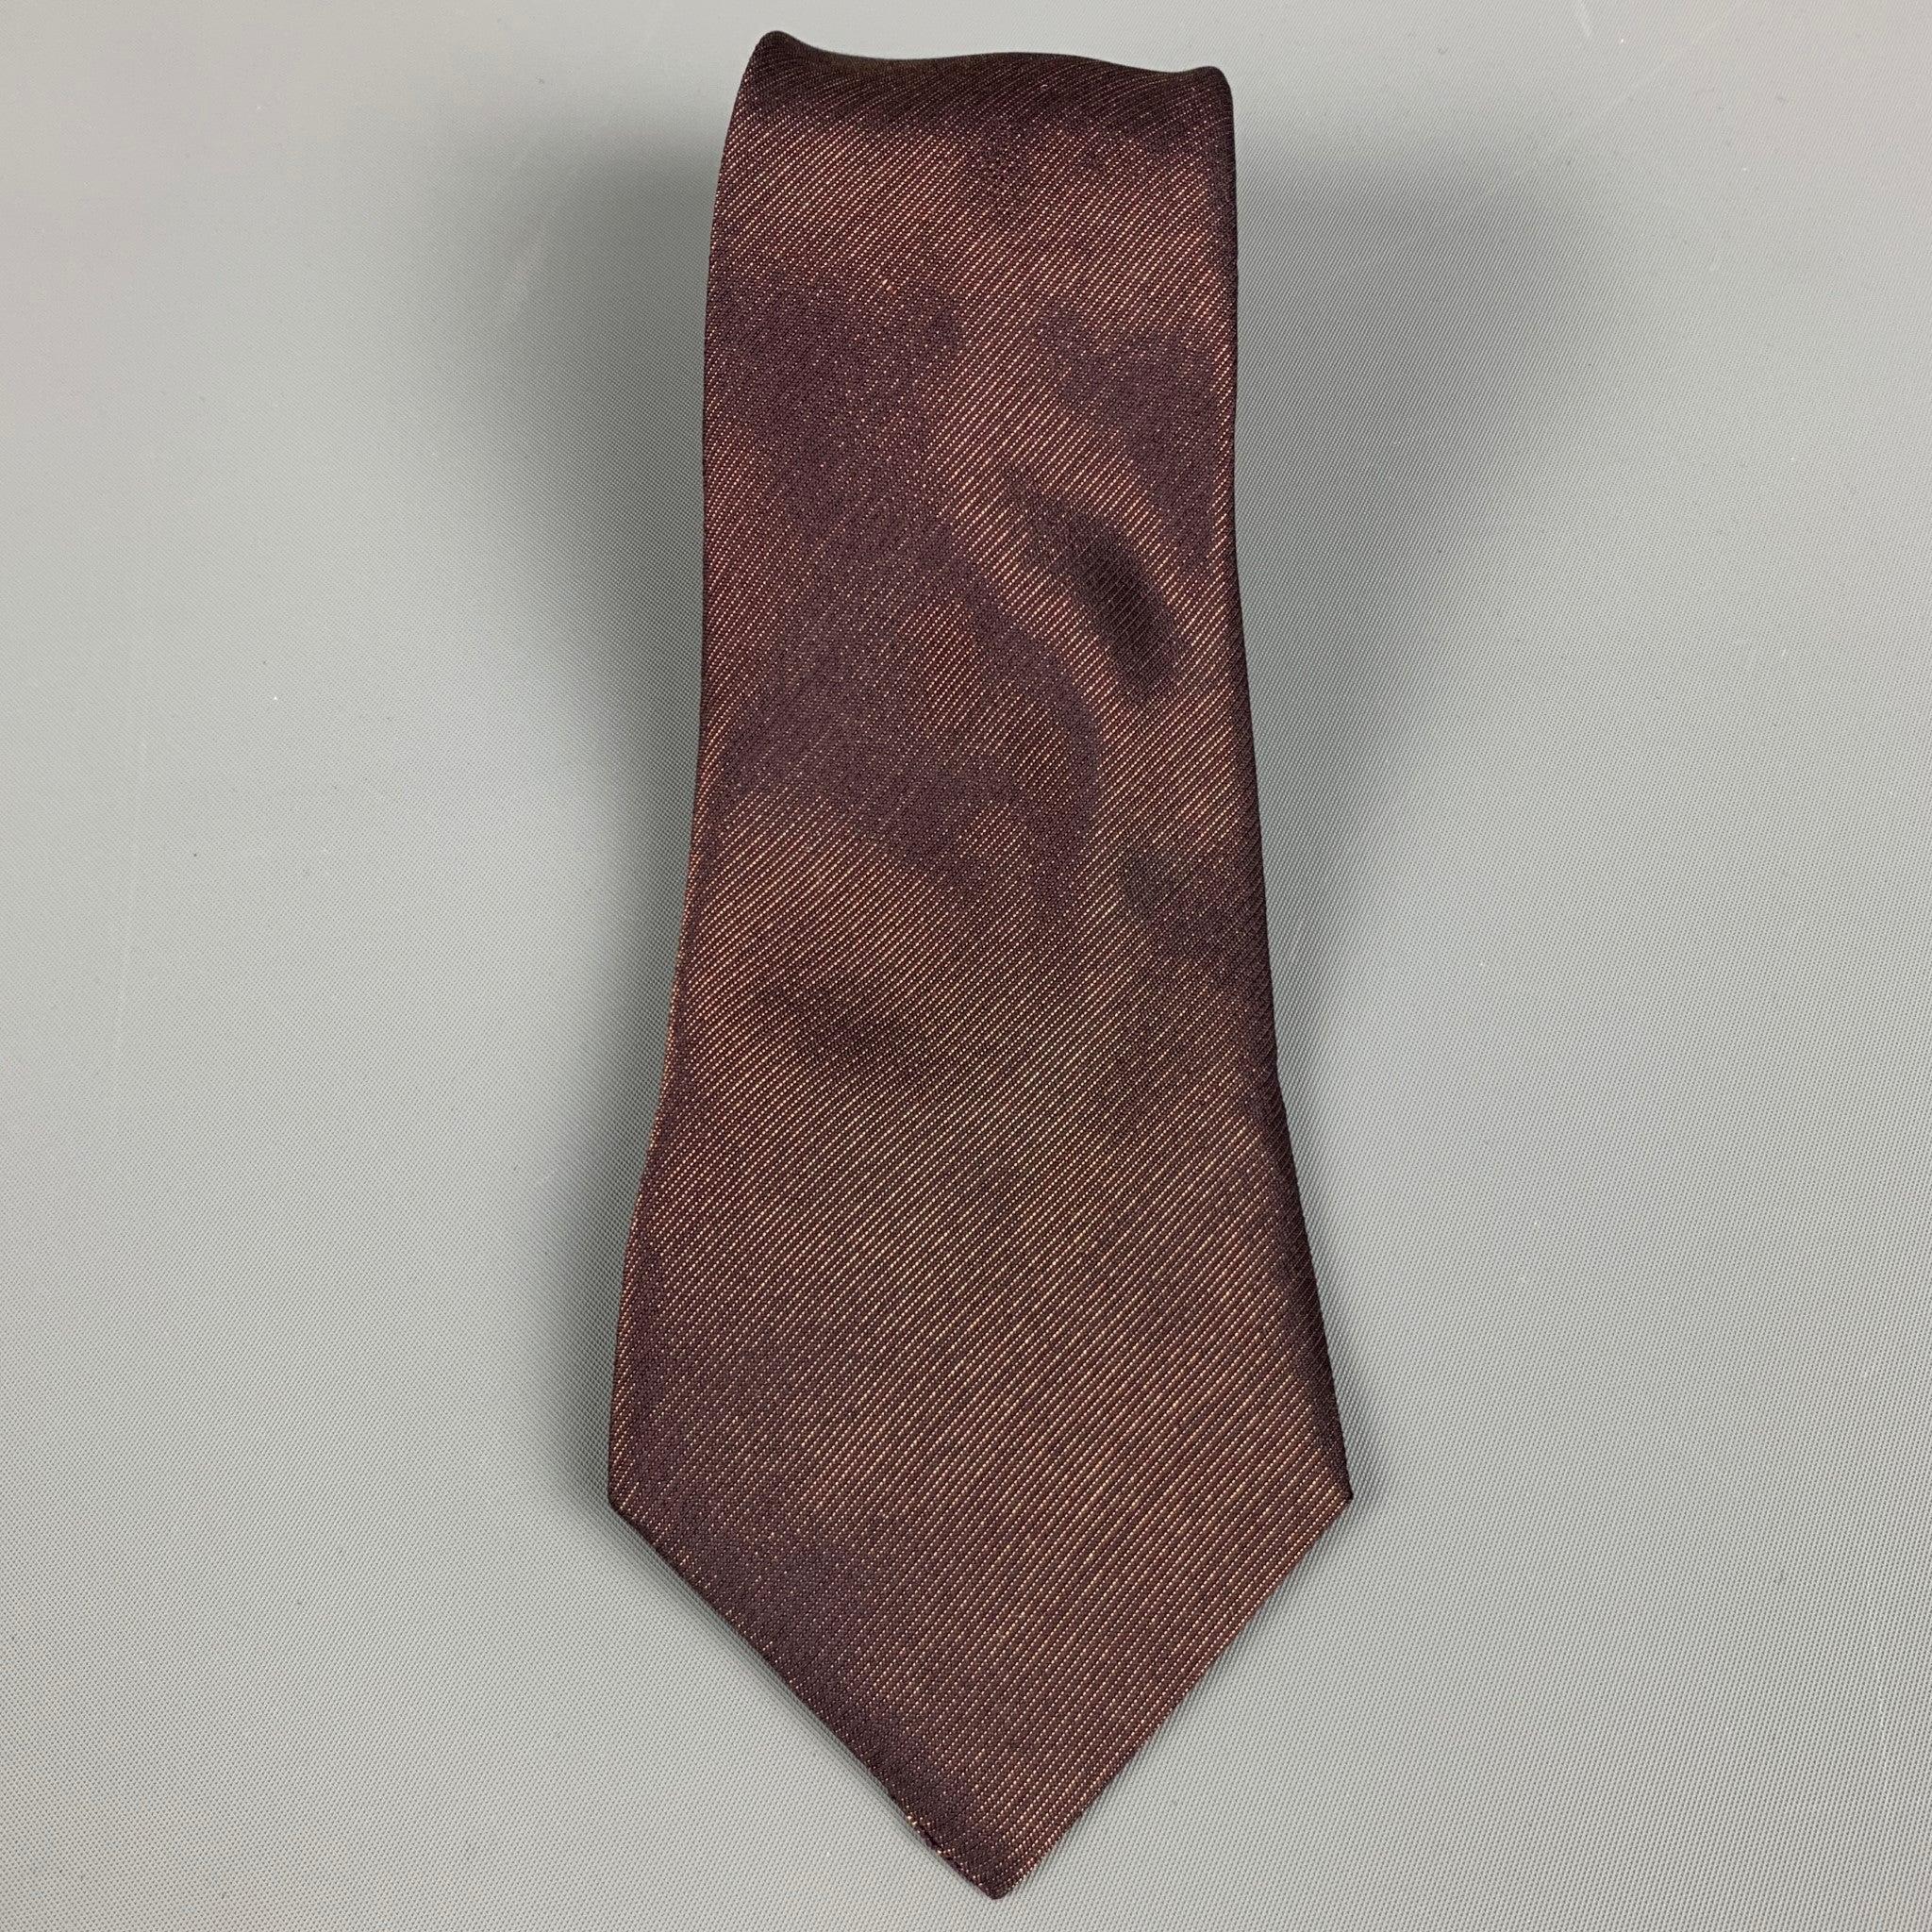 JIL SANDER
necktie in a gold tone and purple silk interwoven with metal, giving the tie its soft yet metallic appearance. Made in Italy.Excellent Pre-Owned Condition. 

Measurements: 
  Width: 3.5 inches Length: 62 inches 
  
  
 
Reference: